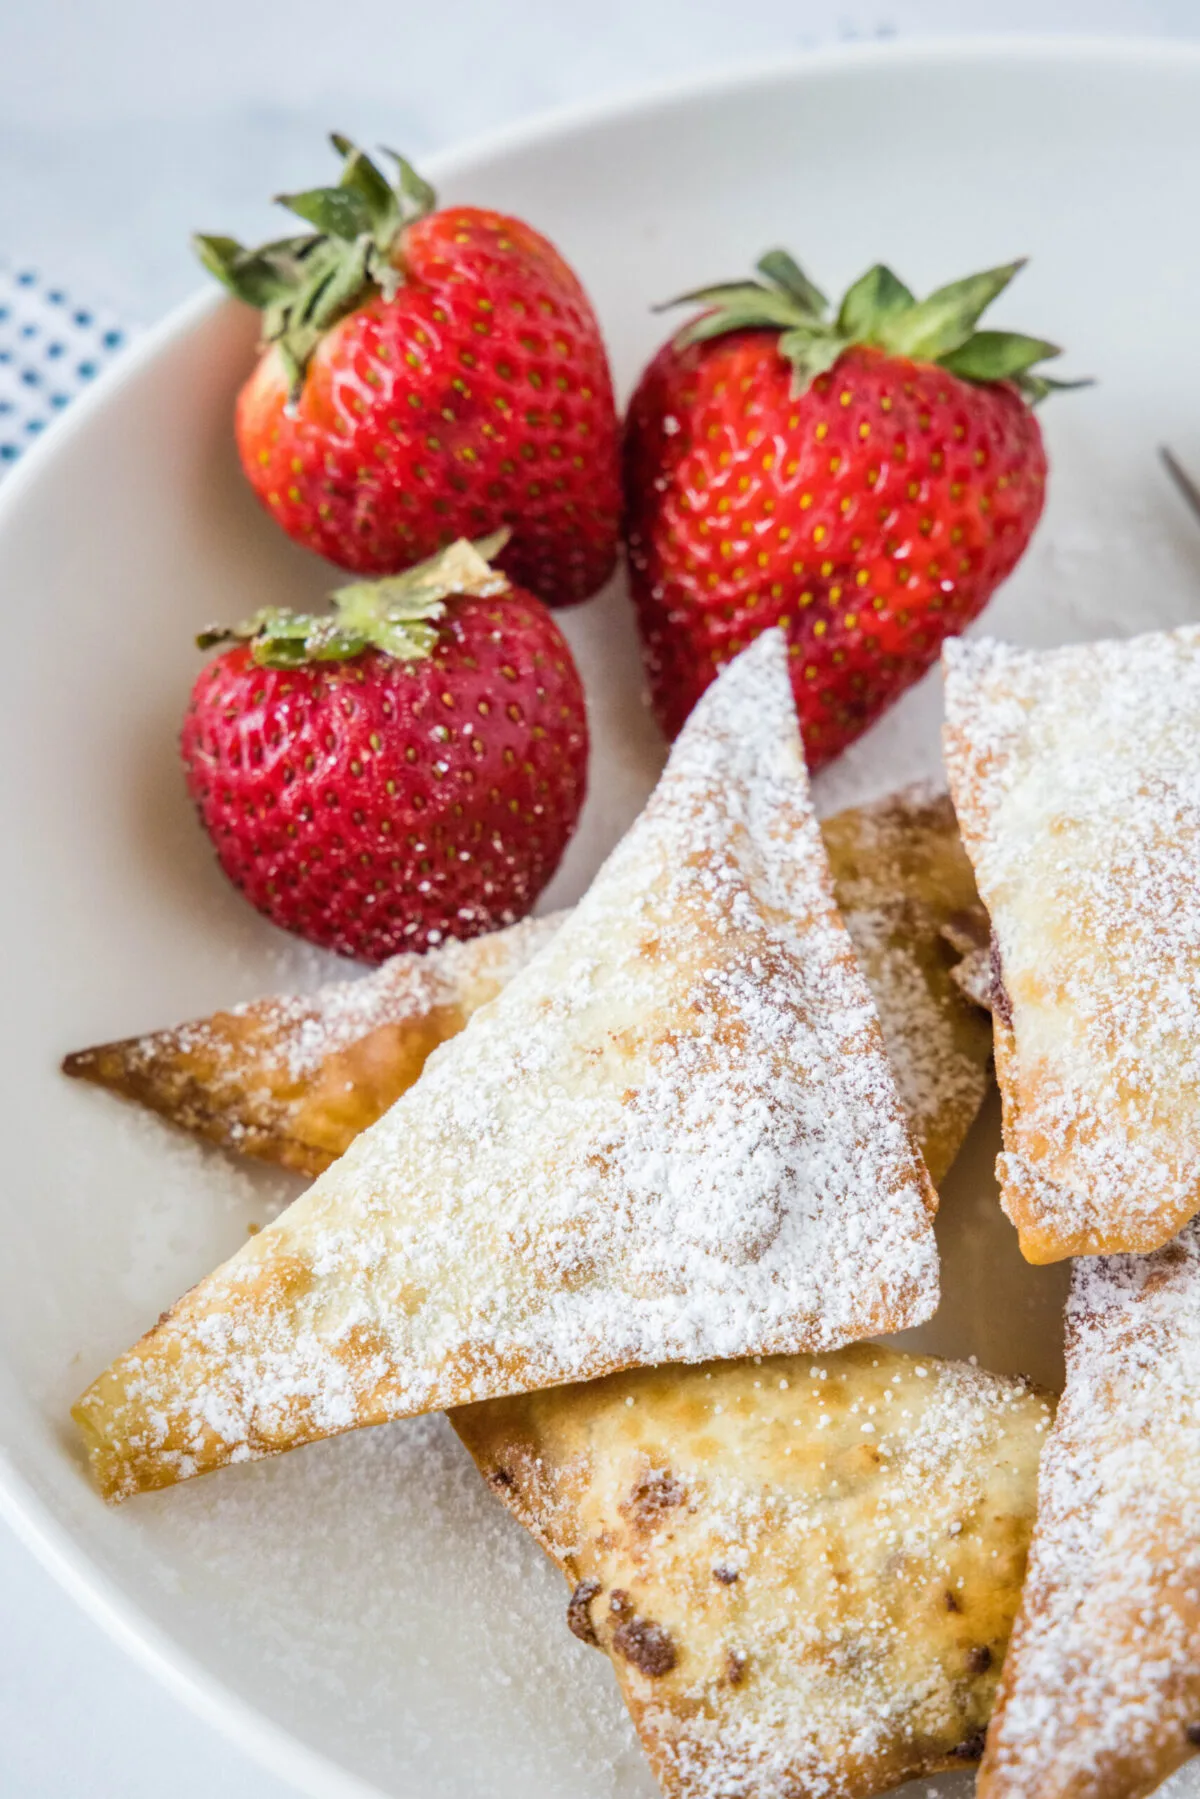 Overhead view of a few wontons covered in powdered sugar, next to three strawberries